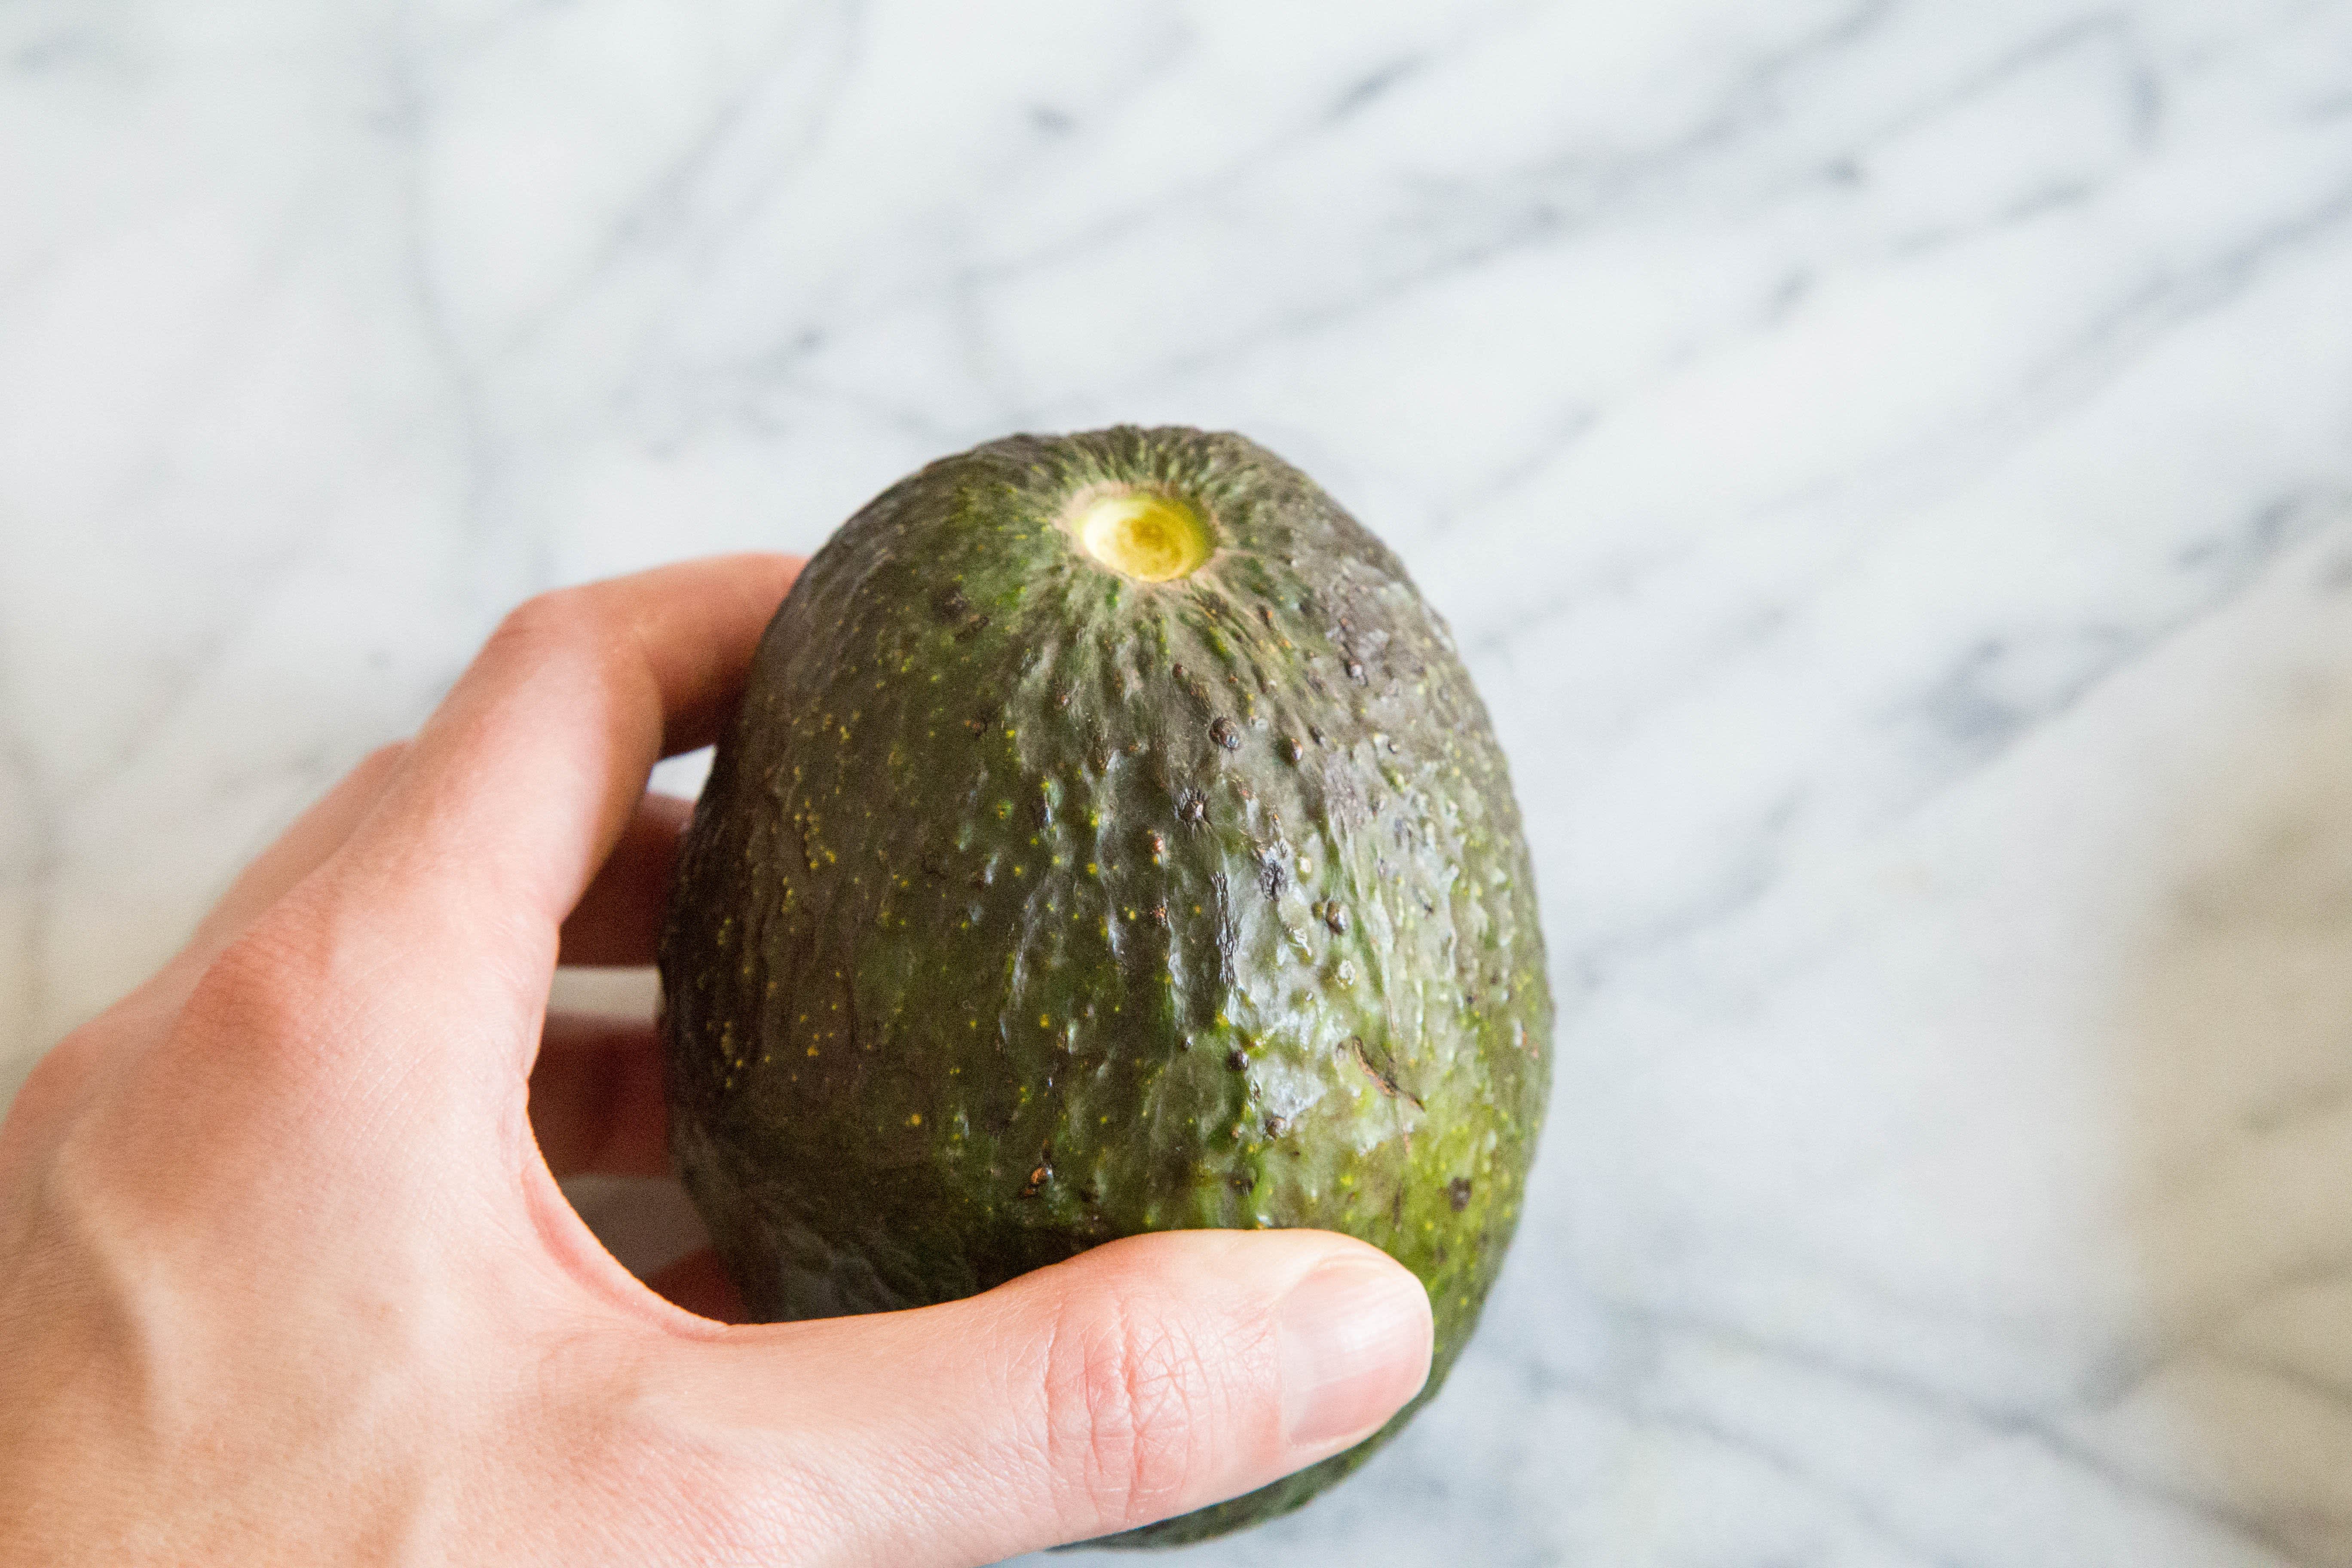 How to Tell If an Avocado Is Ripe (and How to Store It)